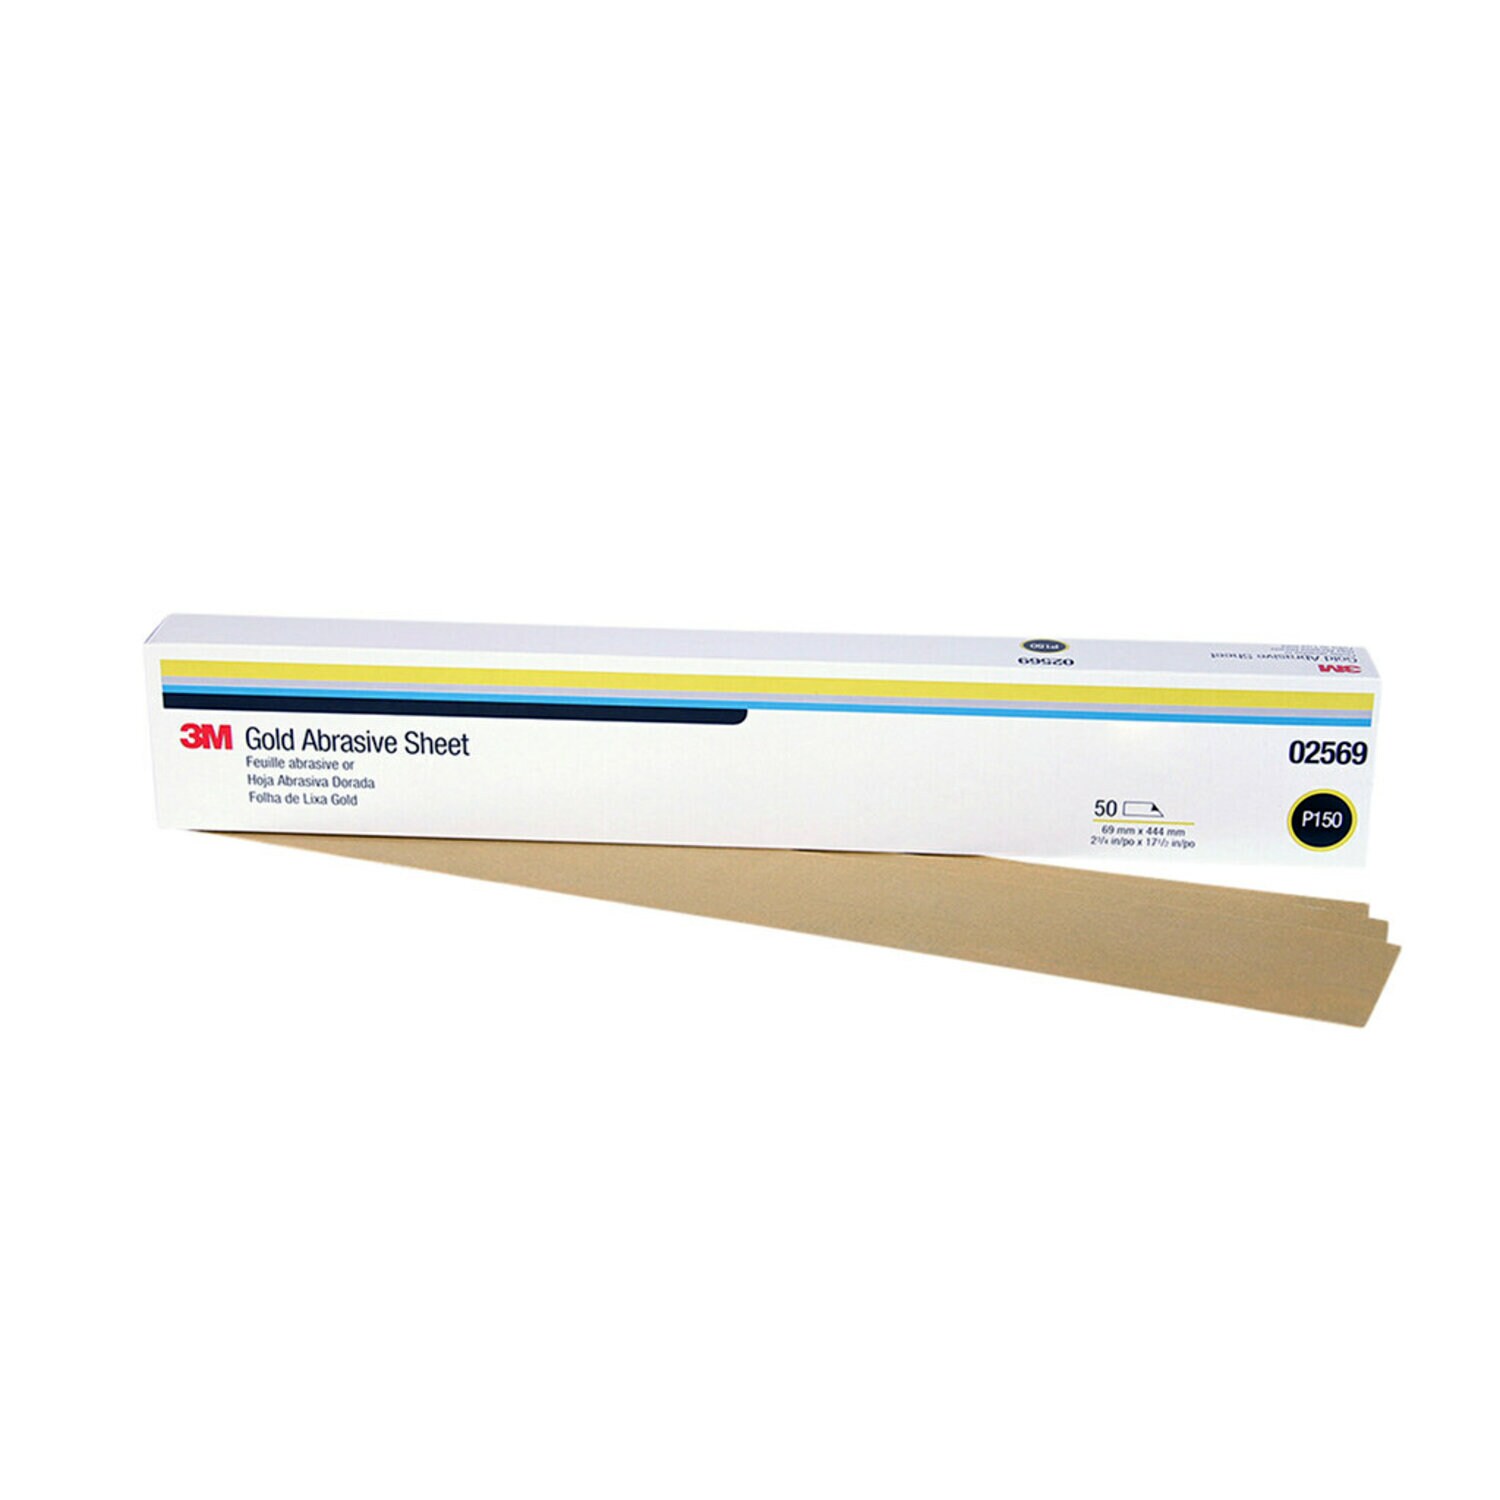 7010325646 - 3M Gold Abrasive Sheet, 02569, P150 grade, 2 3/4 in x 17 1/2 in, 50
sheets per sleeve, 5 sleeves per case